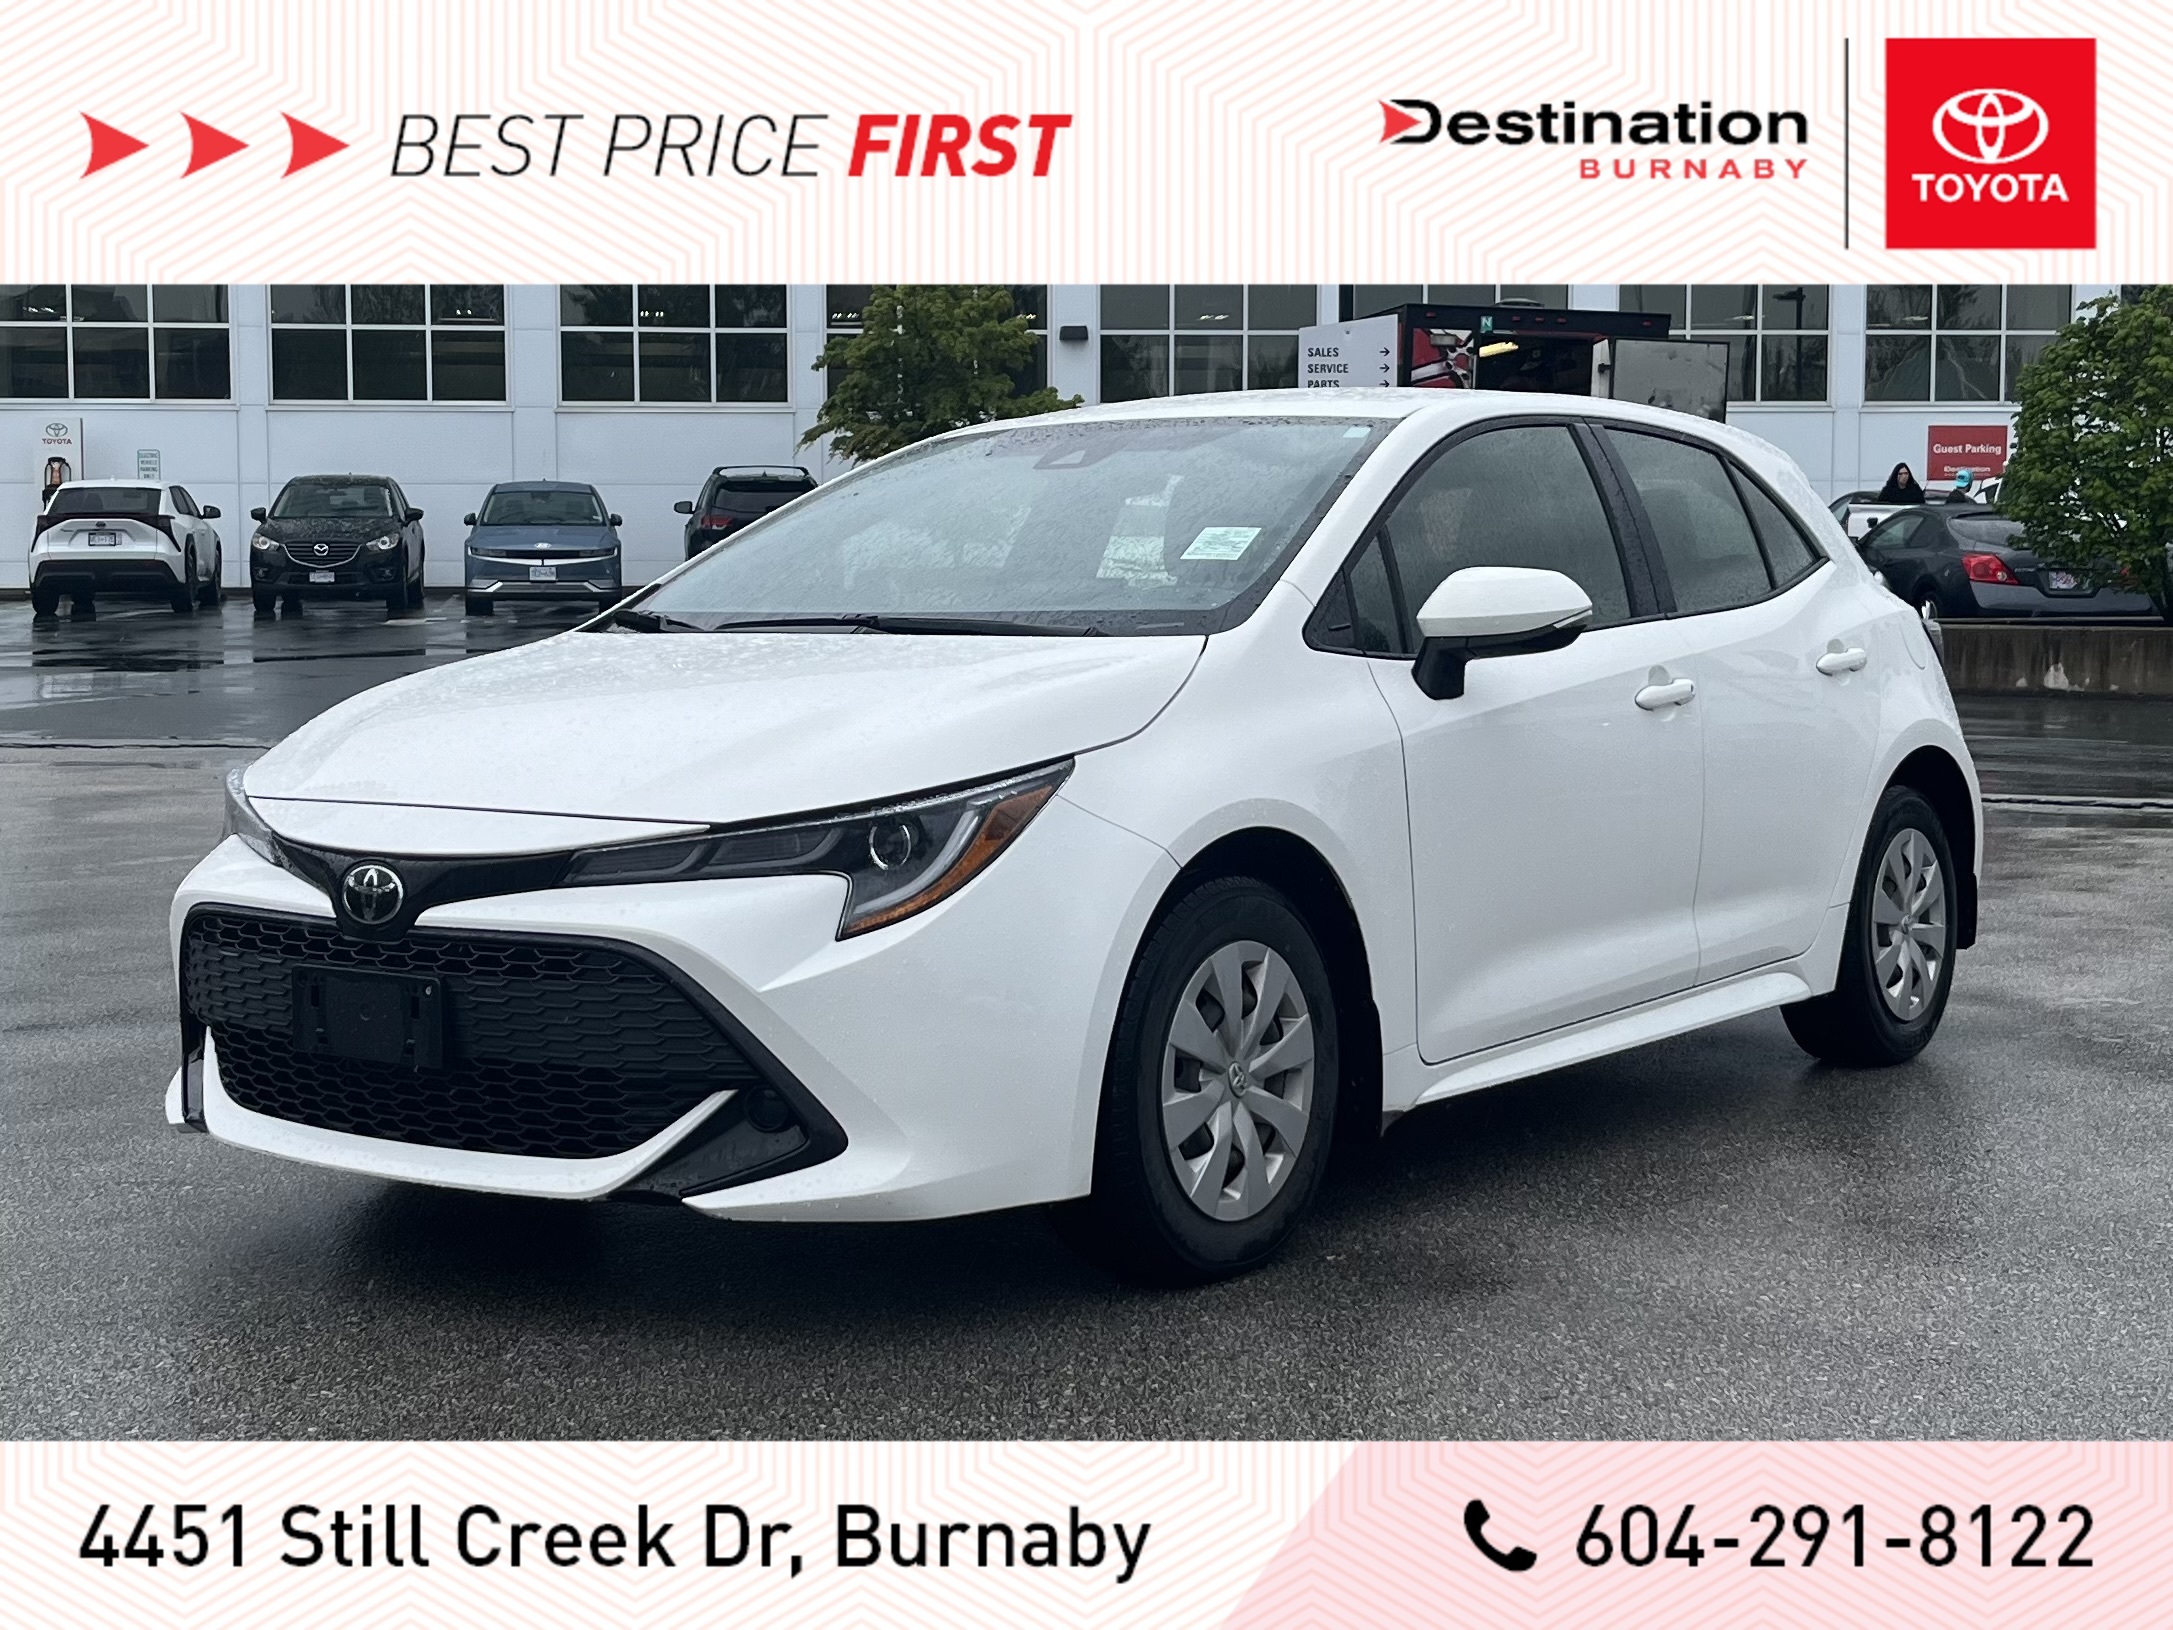 2019 Toyota Corolla 6-speed, Low Kms, No accidents